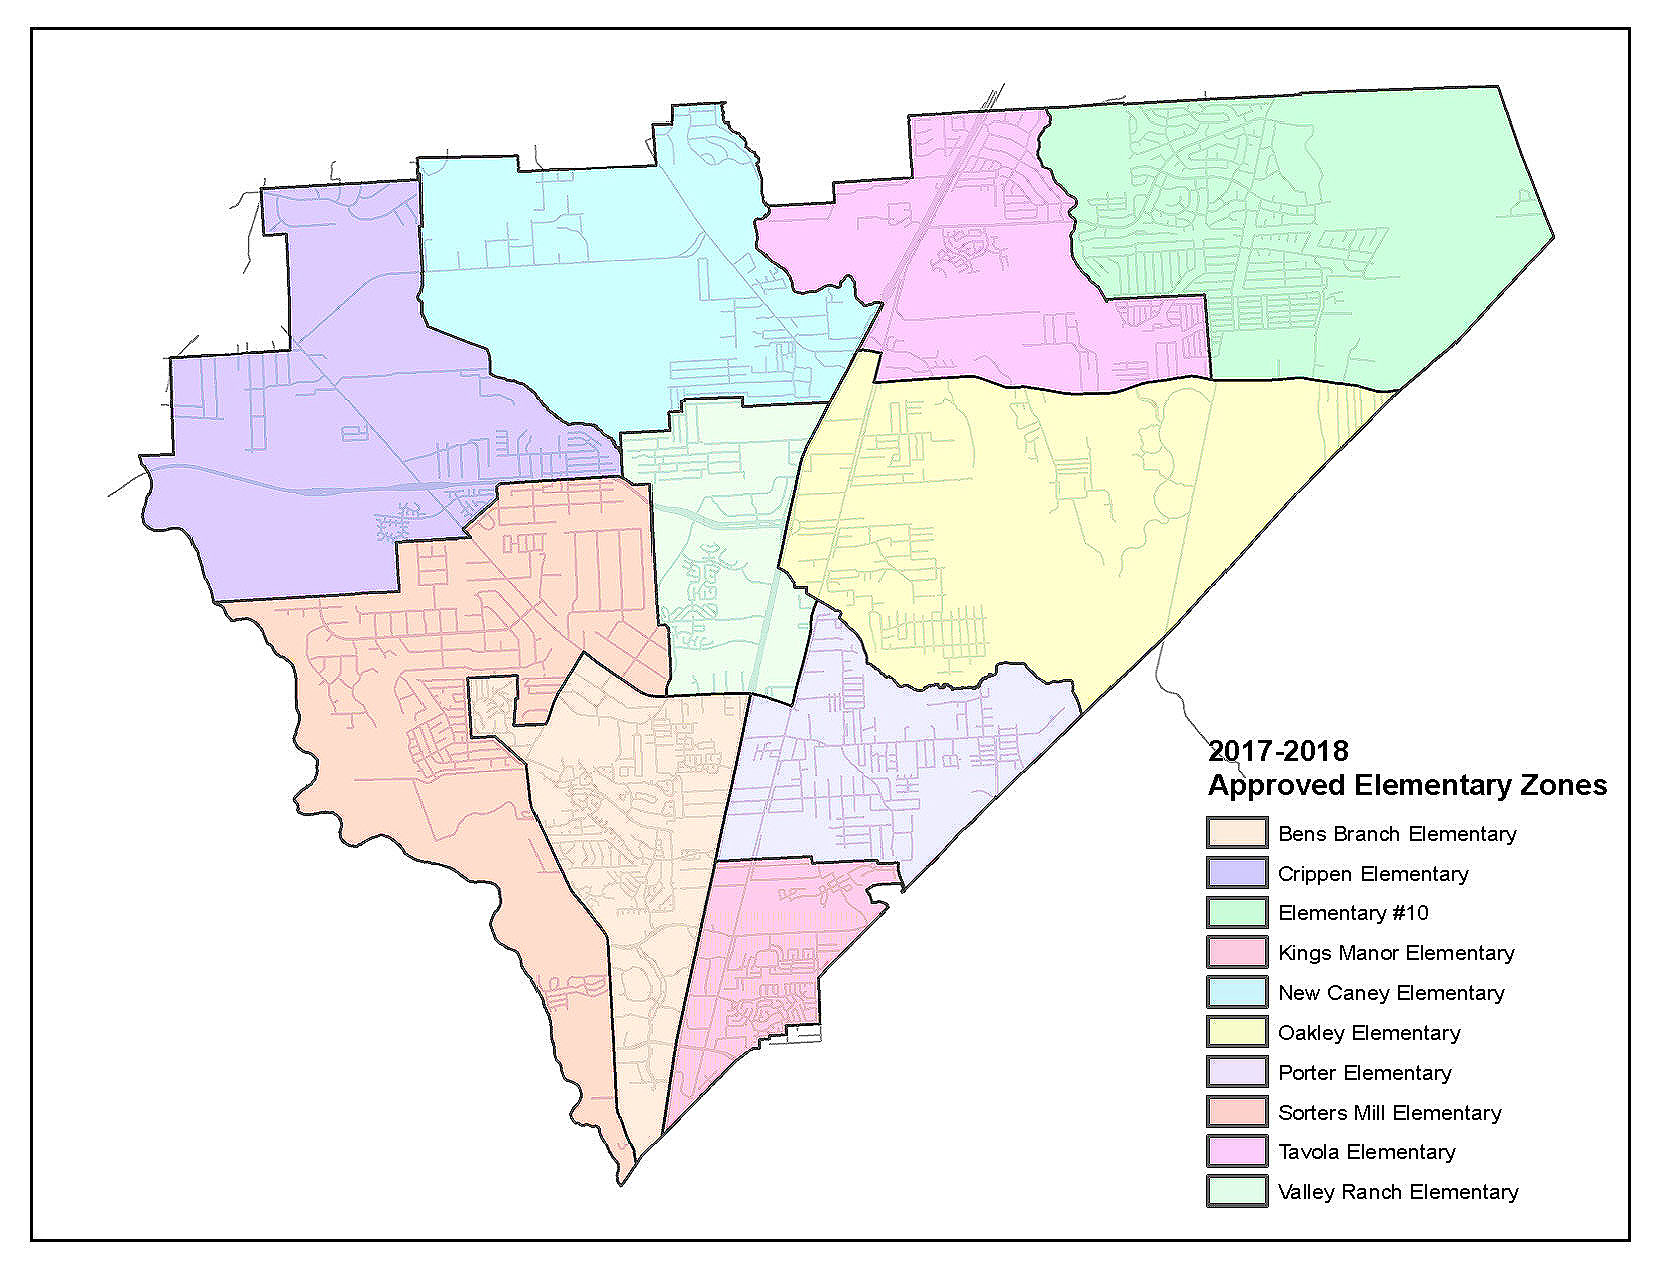 New elementary attendance zone boundaries approved for New Caney ISD - Houston Chronicle1662 x 1275